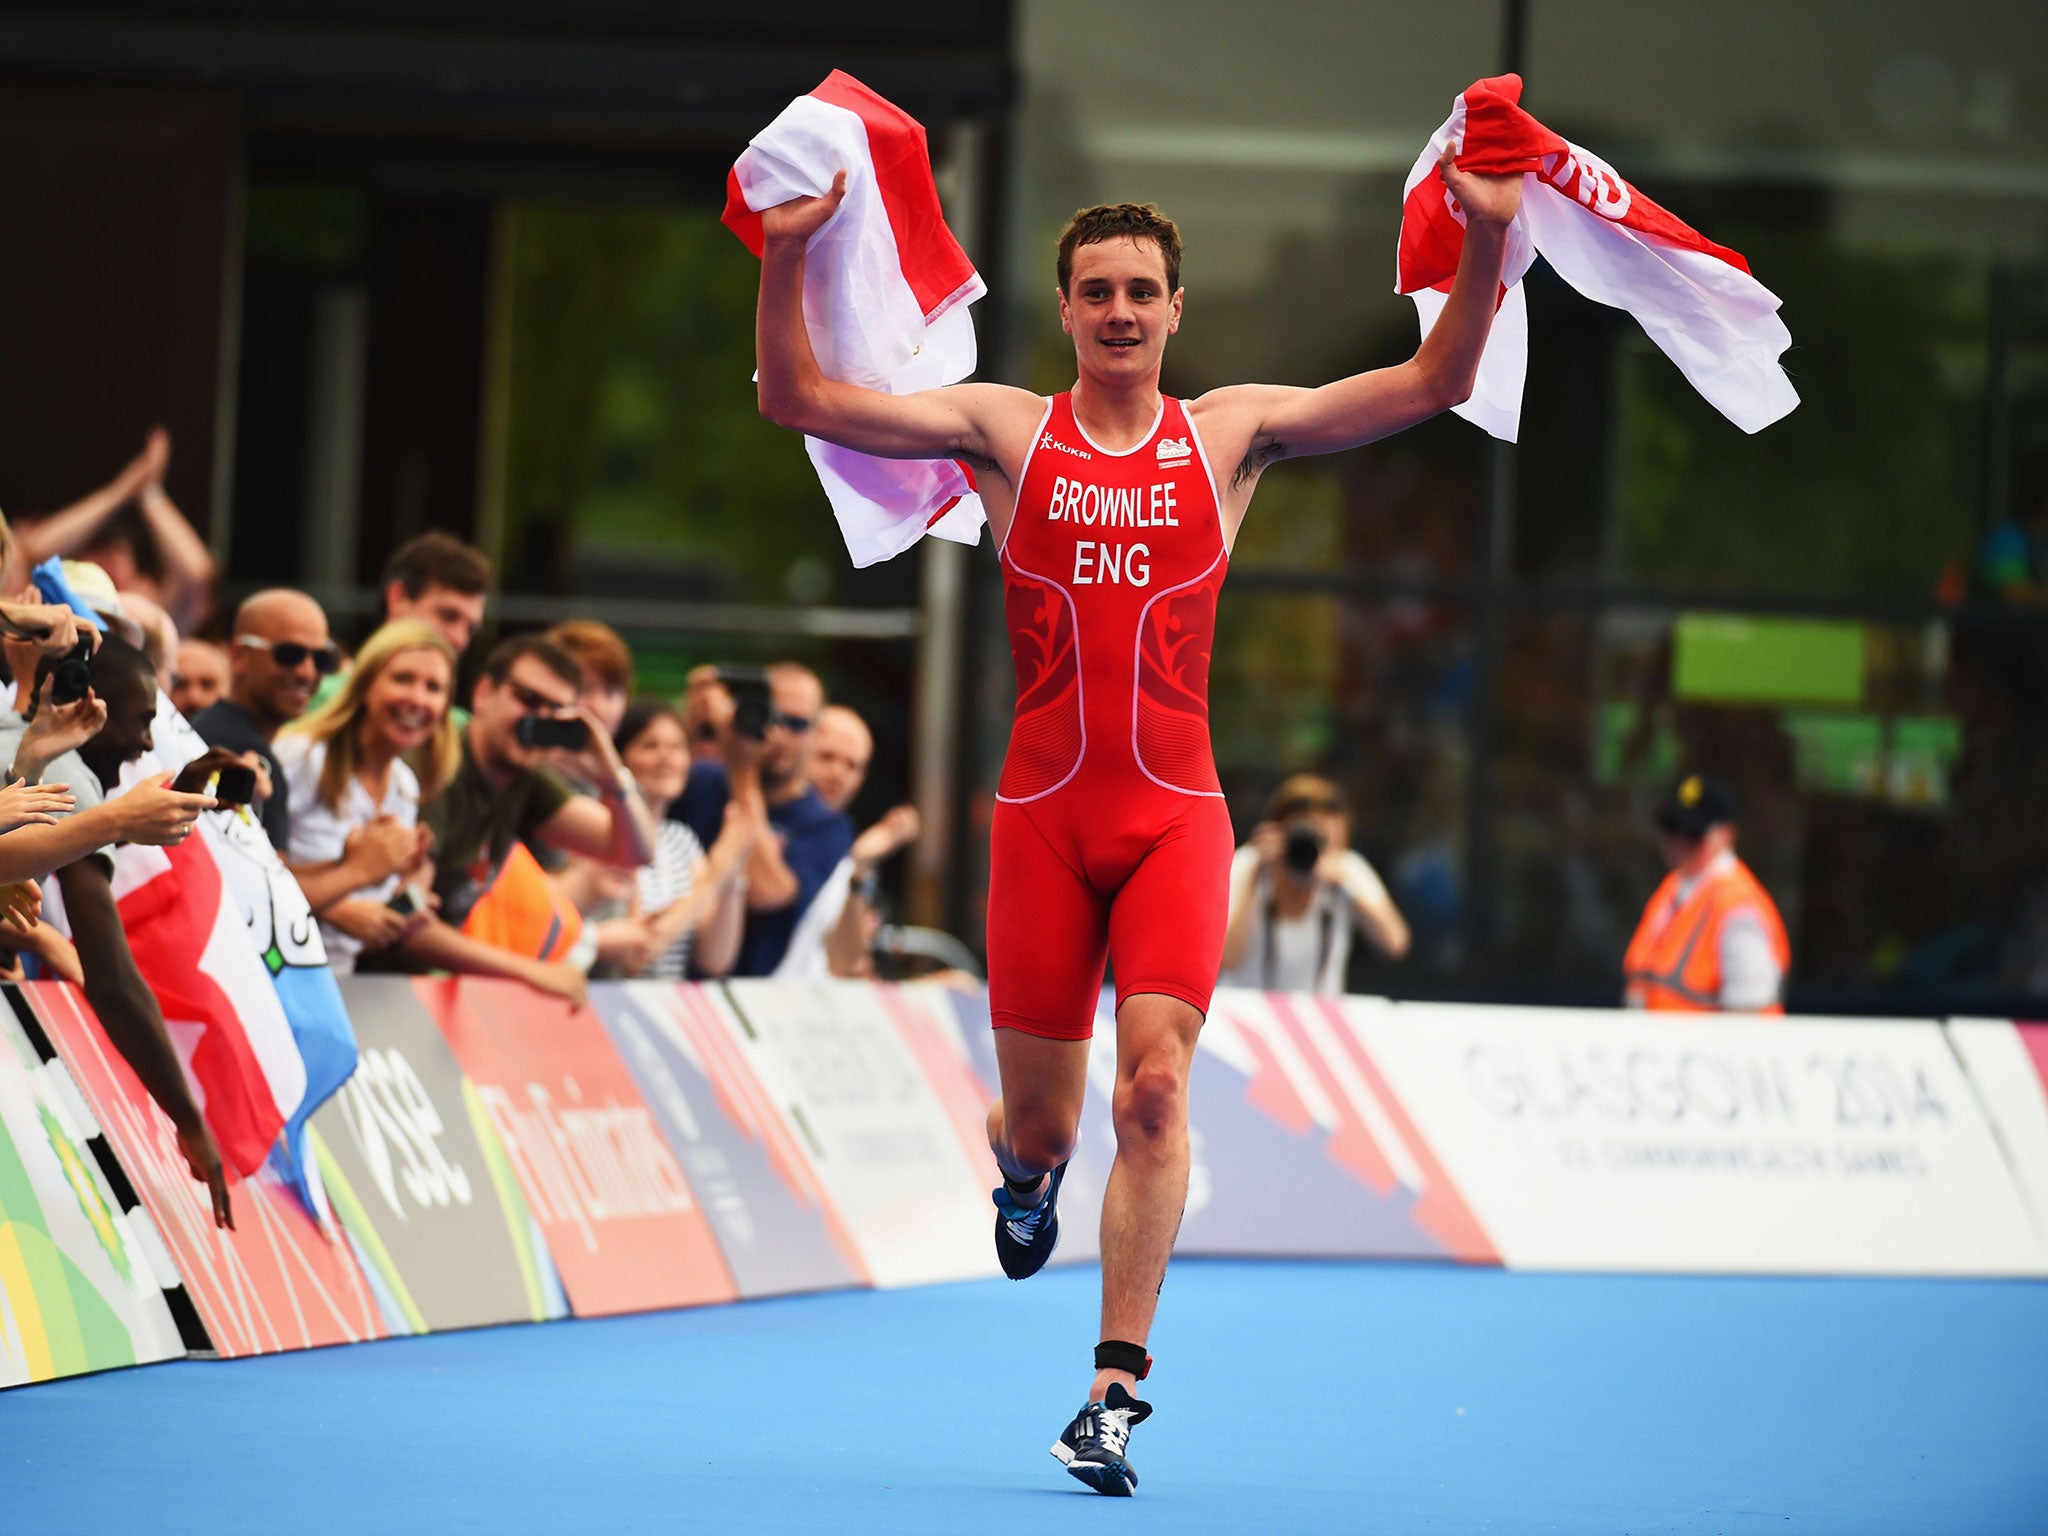 Alistair Brownlee approaches the finishing line to win the mixed triathlon for England